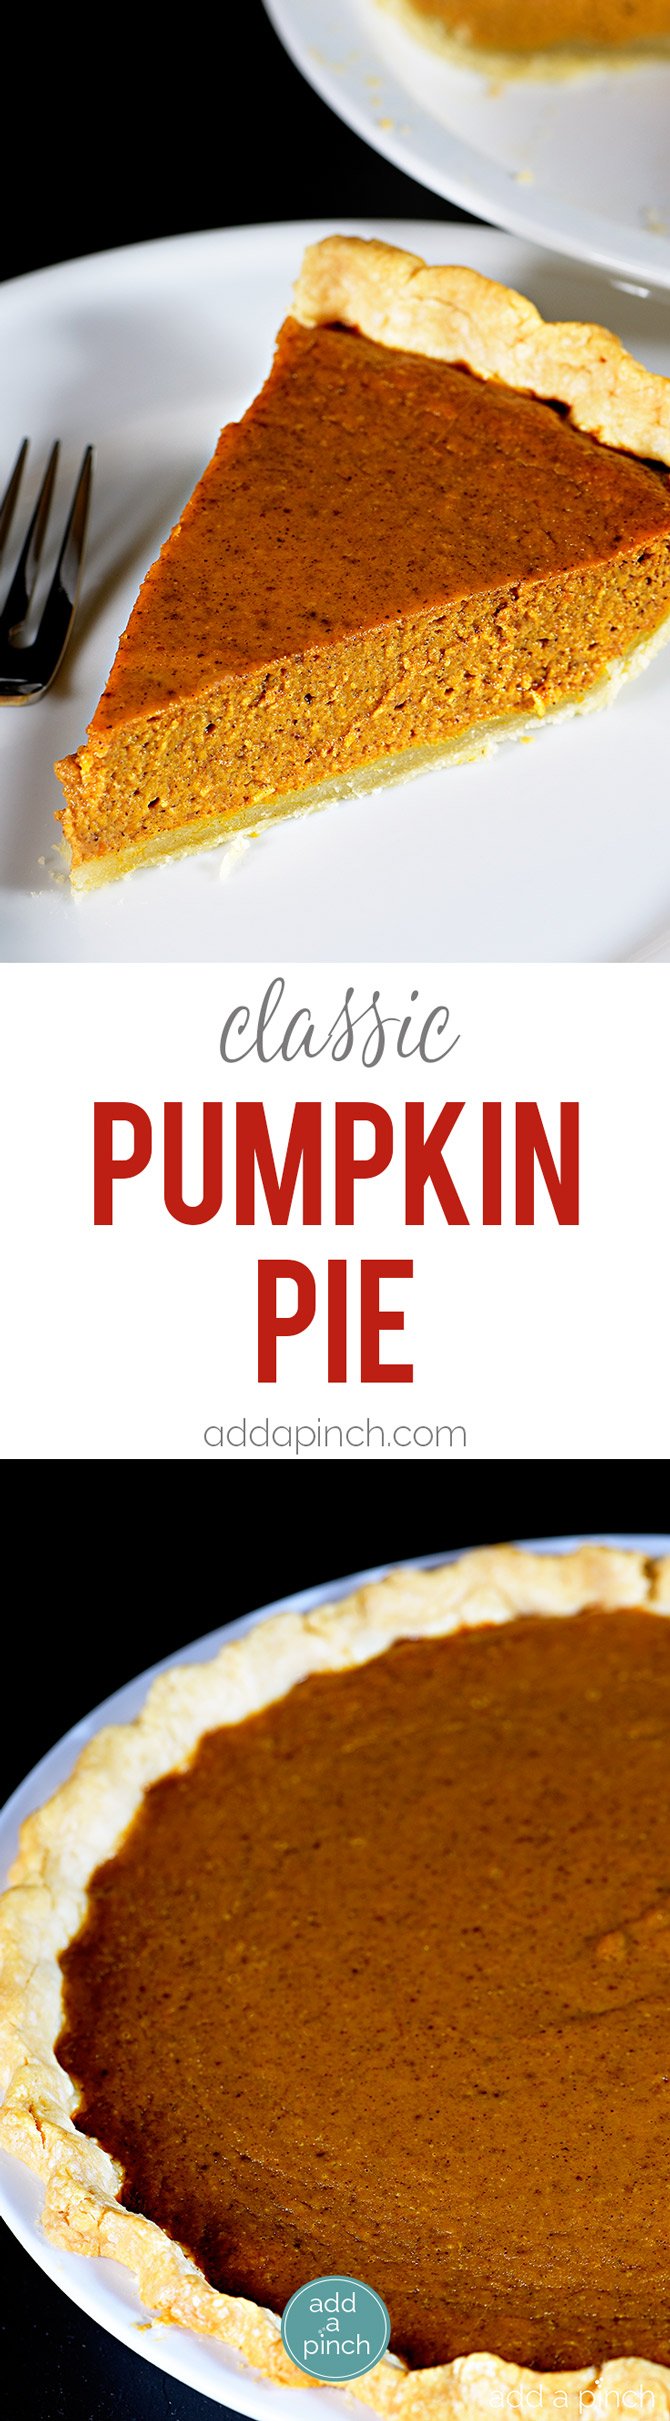 Classic Pumpkin Pie Recipe - This classic pumpkin pie recipe makes an old fashioned pie perfect for serving during the holidays or anytime! So easy and delicious, this is a family-favorite pumpkin pie! // addapinch.com